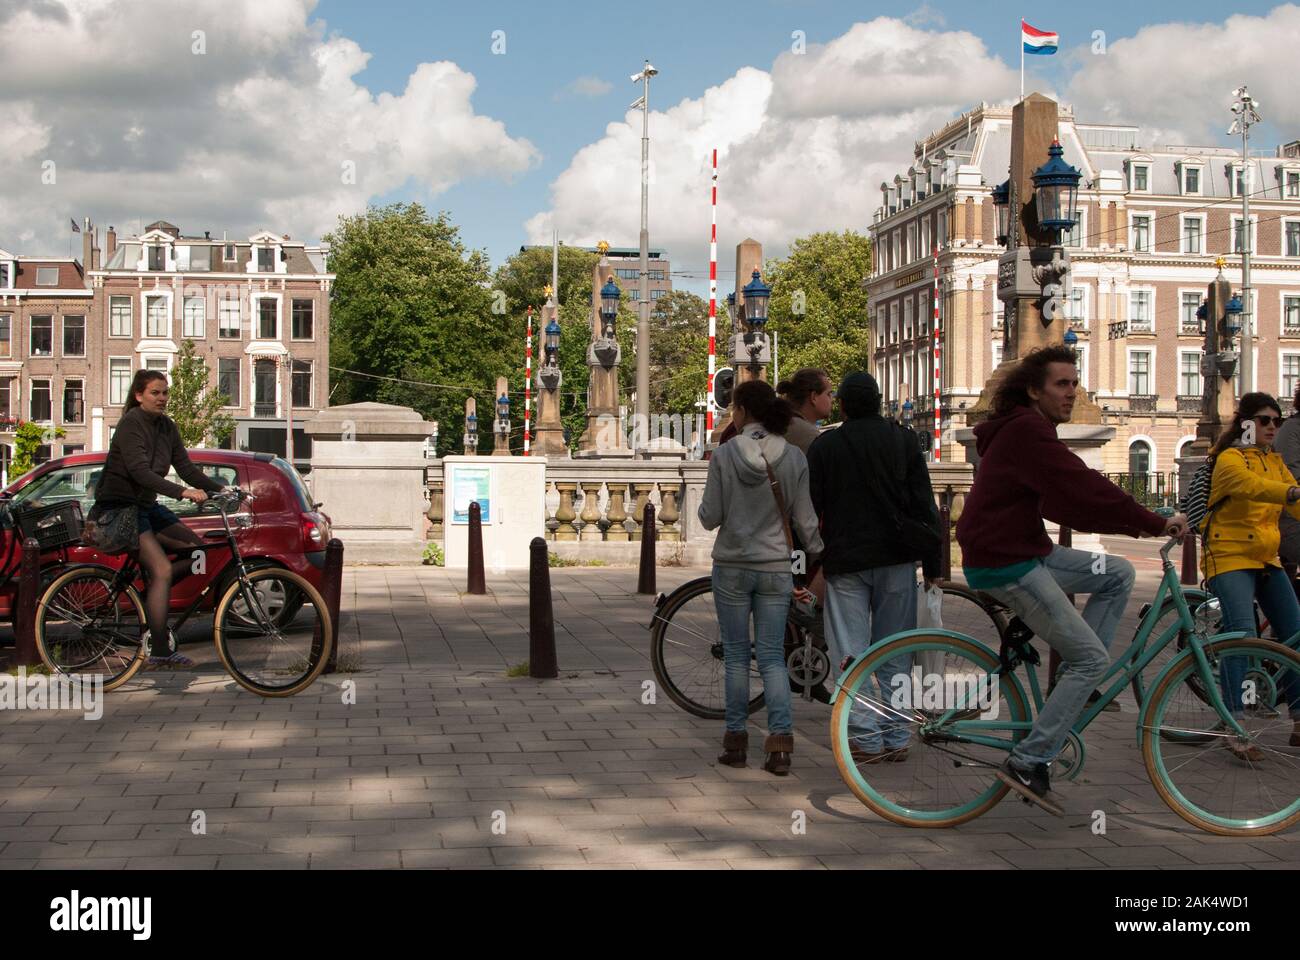 People riding bicyle in the city in a sunny day Stock Photo